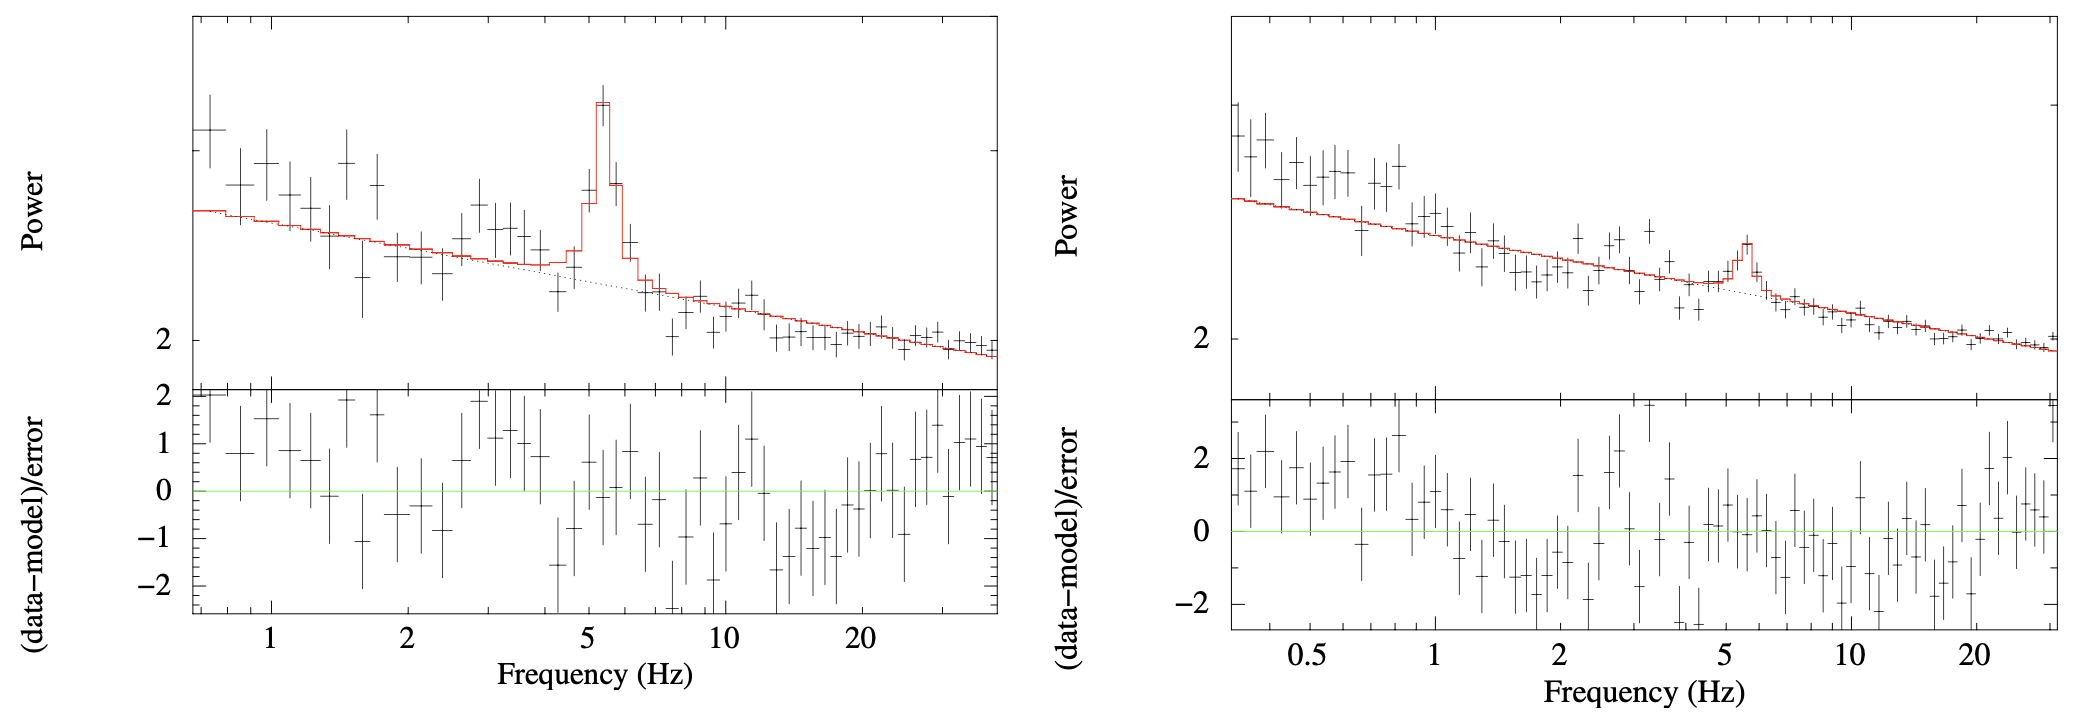 Quasi-periodic X-ray brightness oscillations (QPOs) seen in NICER's first two observations of Swift J1728-3613. The top panels show power-spectral density - the strength of brightness variations at distinct frequencies - as points with error bars, with the red traces indicating a best-fit empirical model for each observation. The bottom panels show data minus model residuals. In the left and right figures, respectively, the measured QPO frequencies are 5.40 and 5.55 Hertz. Figure from Saha et al. (2023).